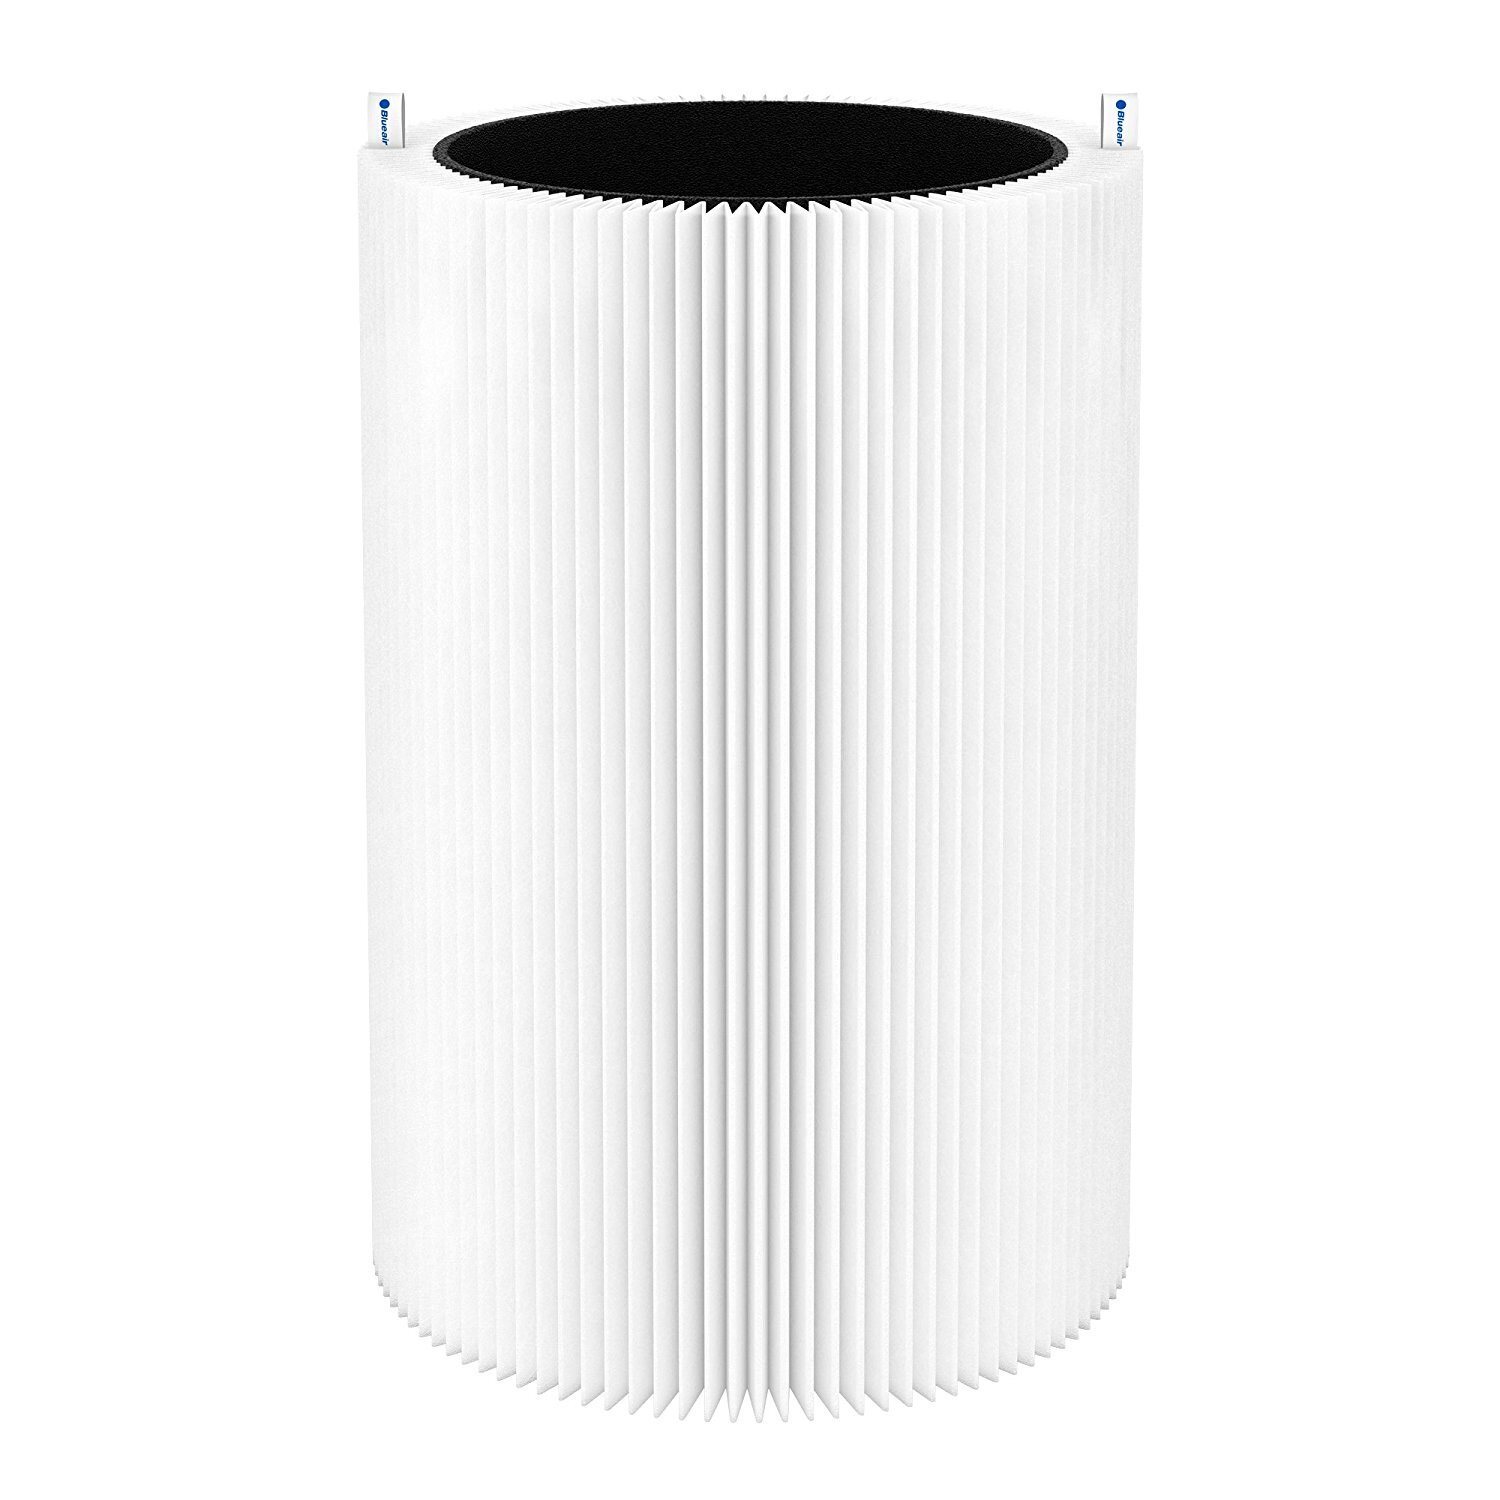 Buy Blueair Blue Pure 411 Particle + Carbon Filter online in Pakistan